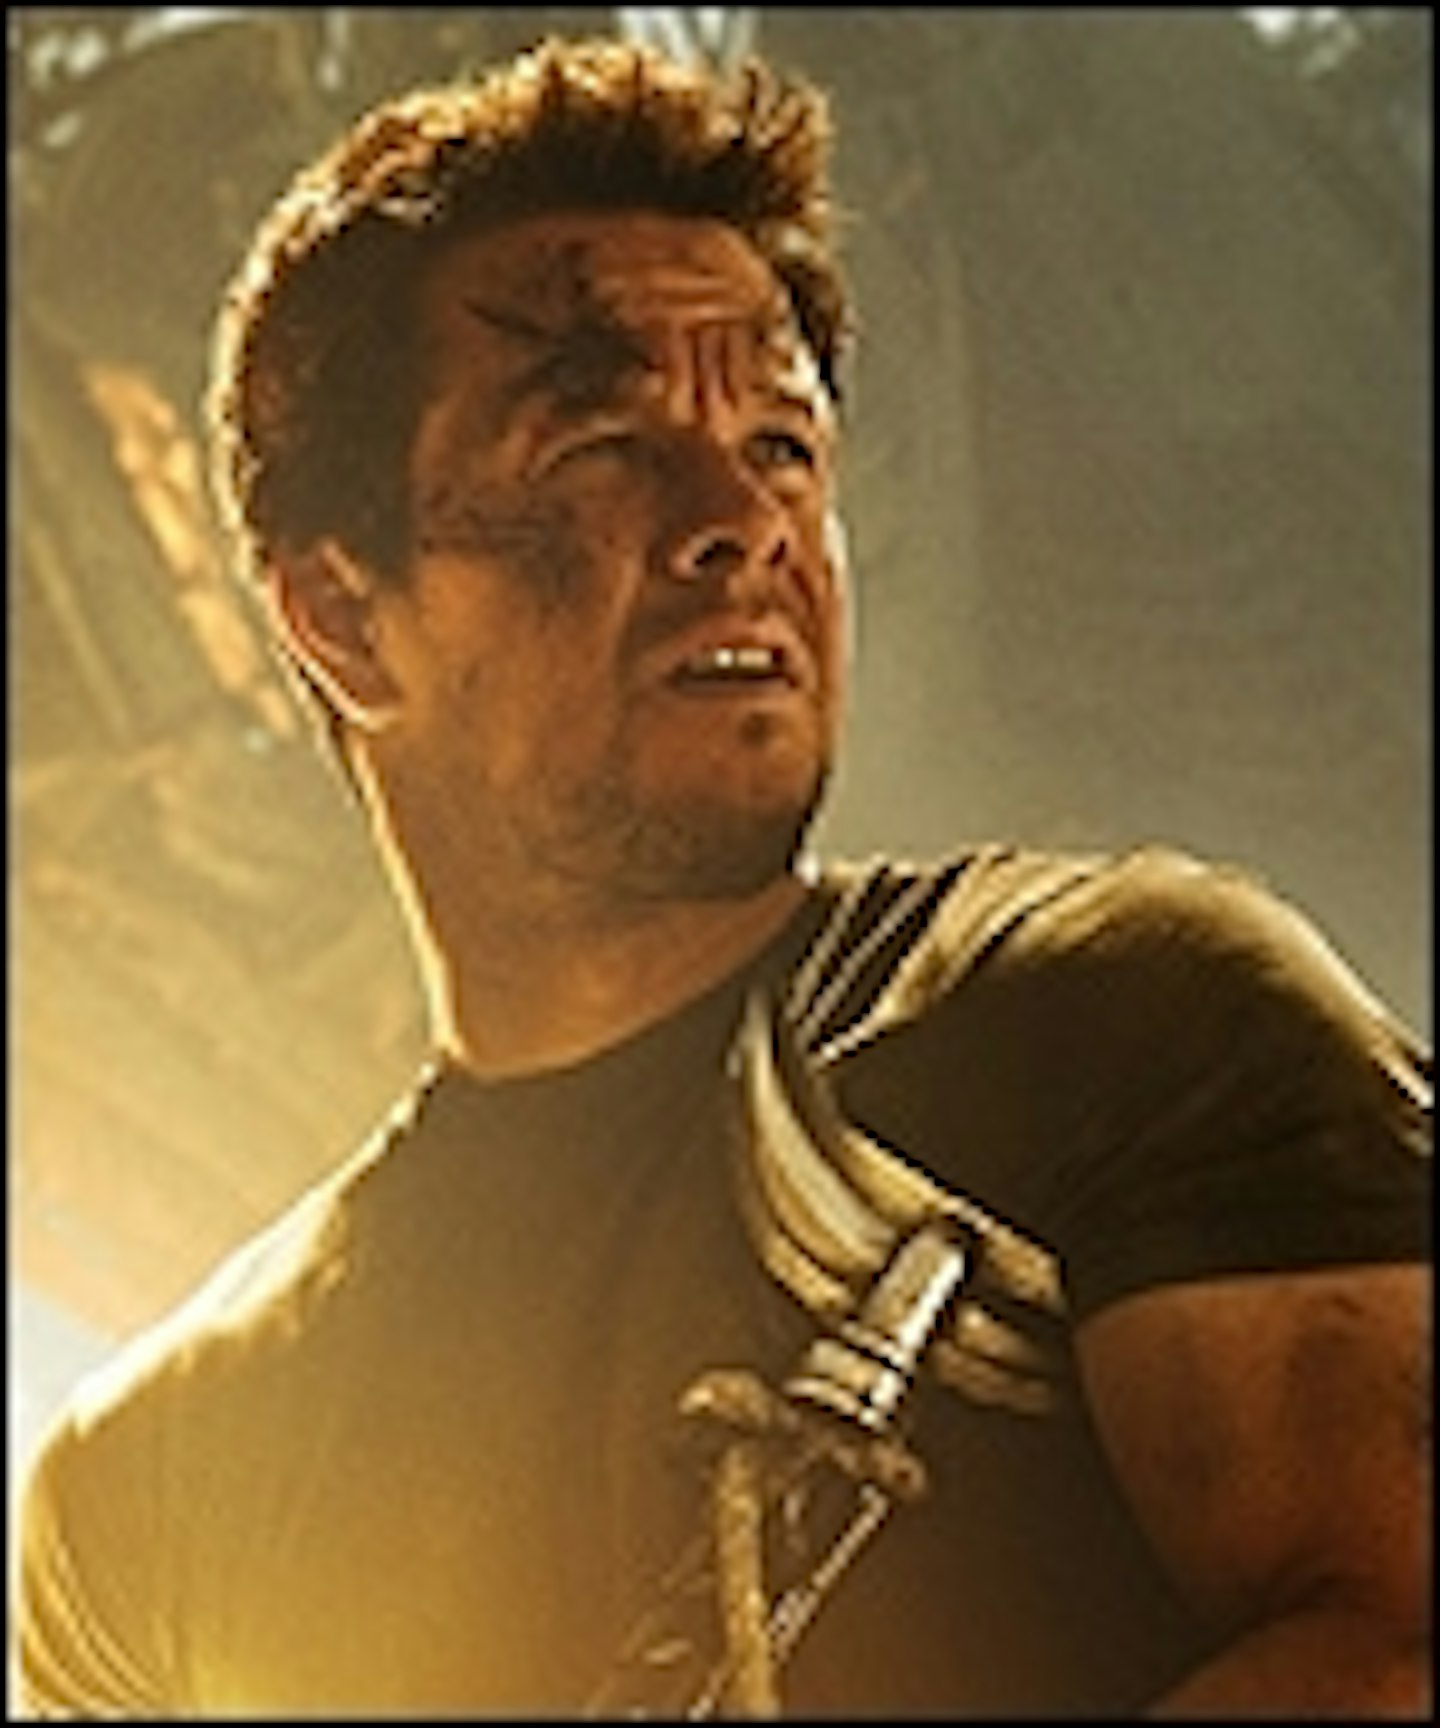 Transformers: Age Of Extinction Character Posters Land